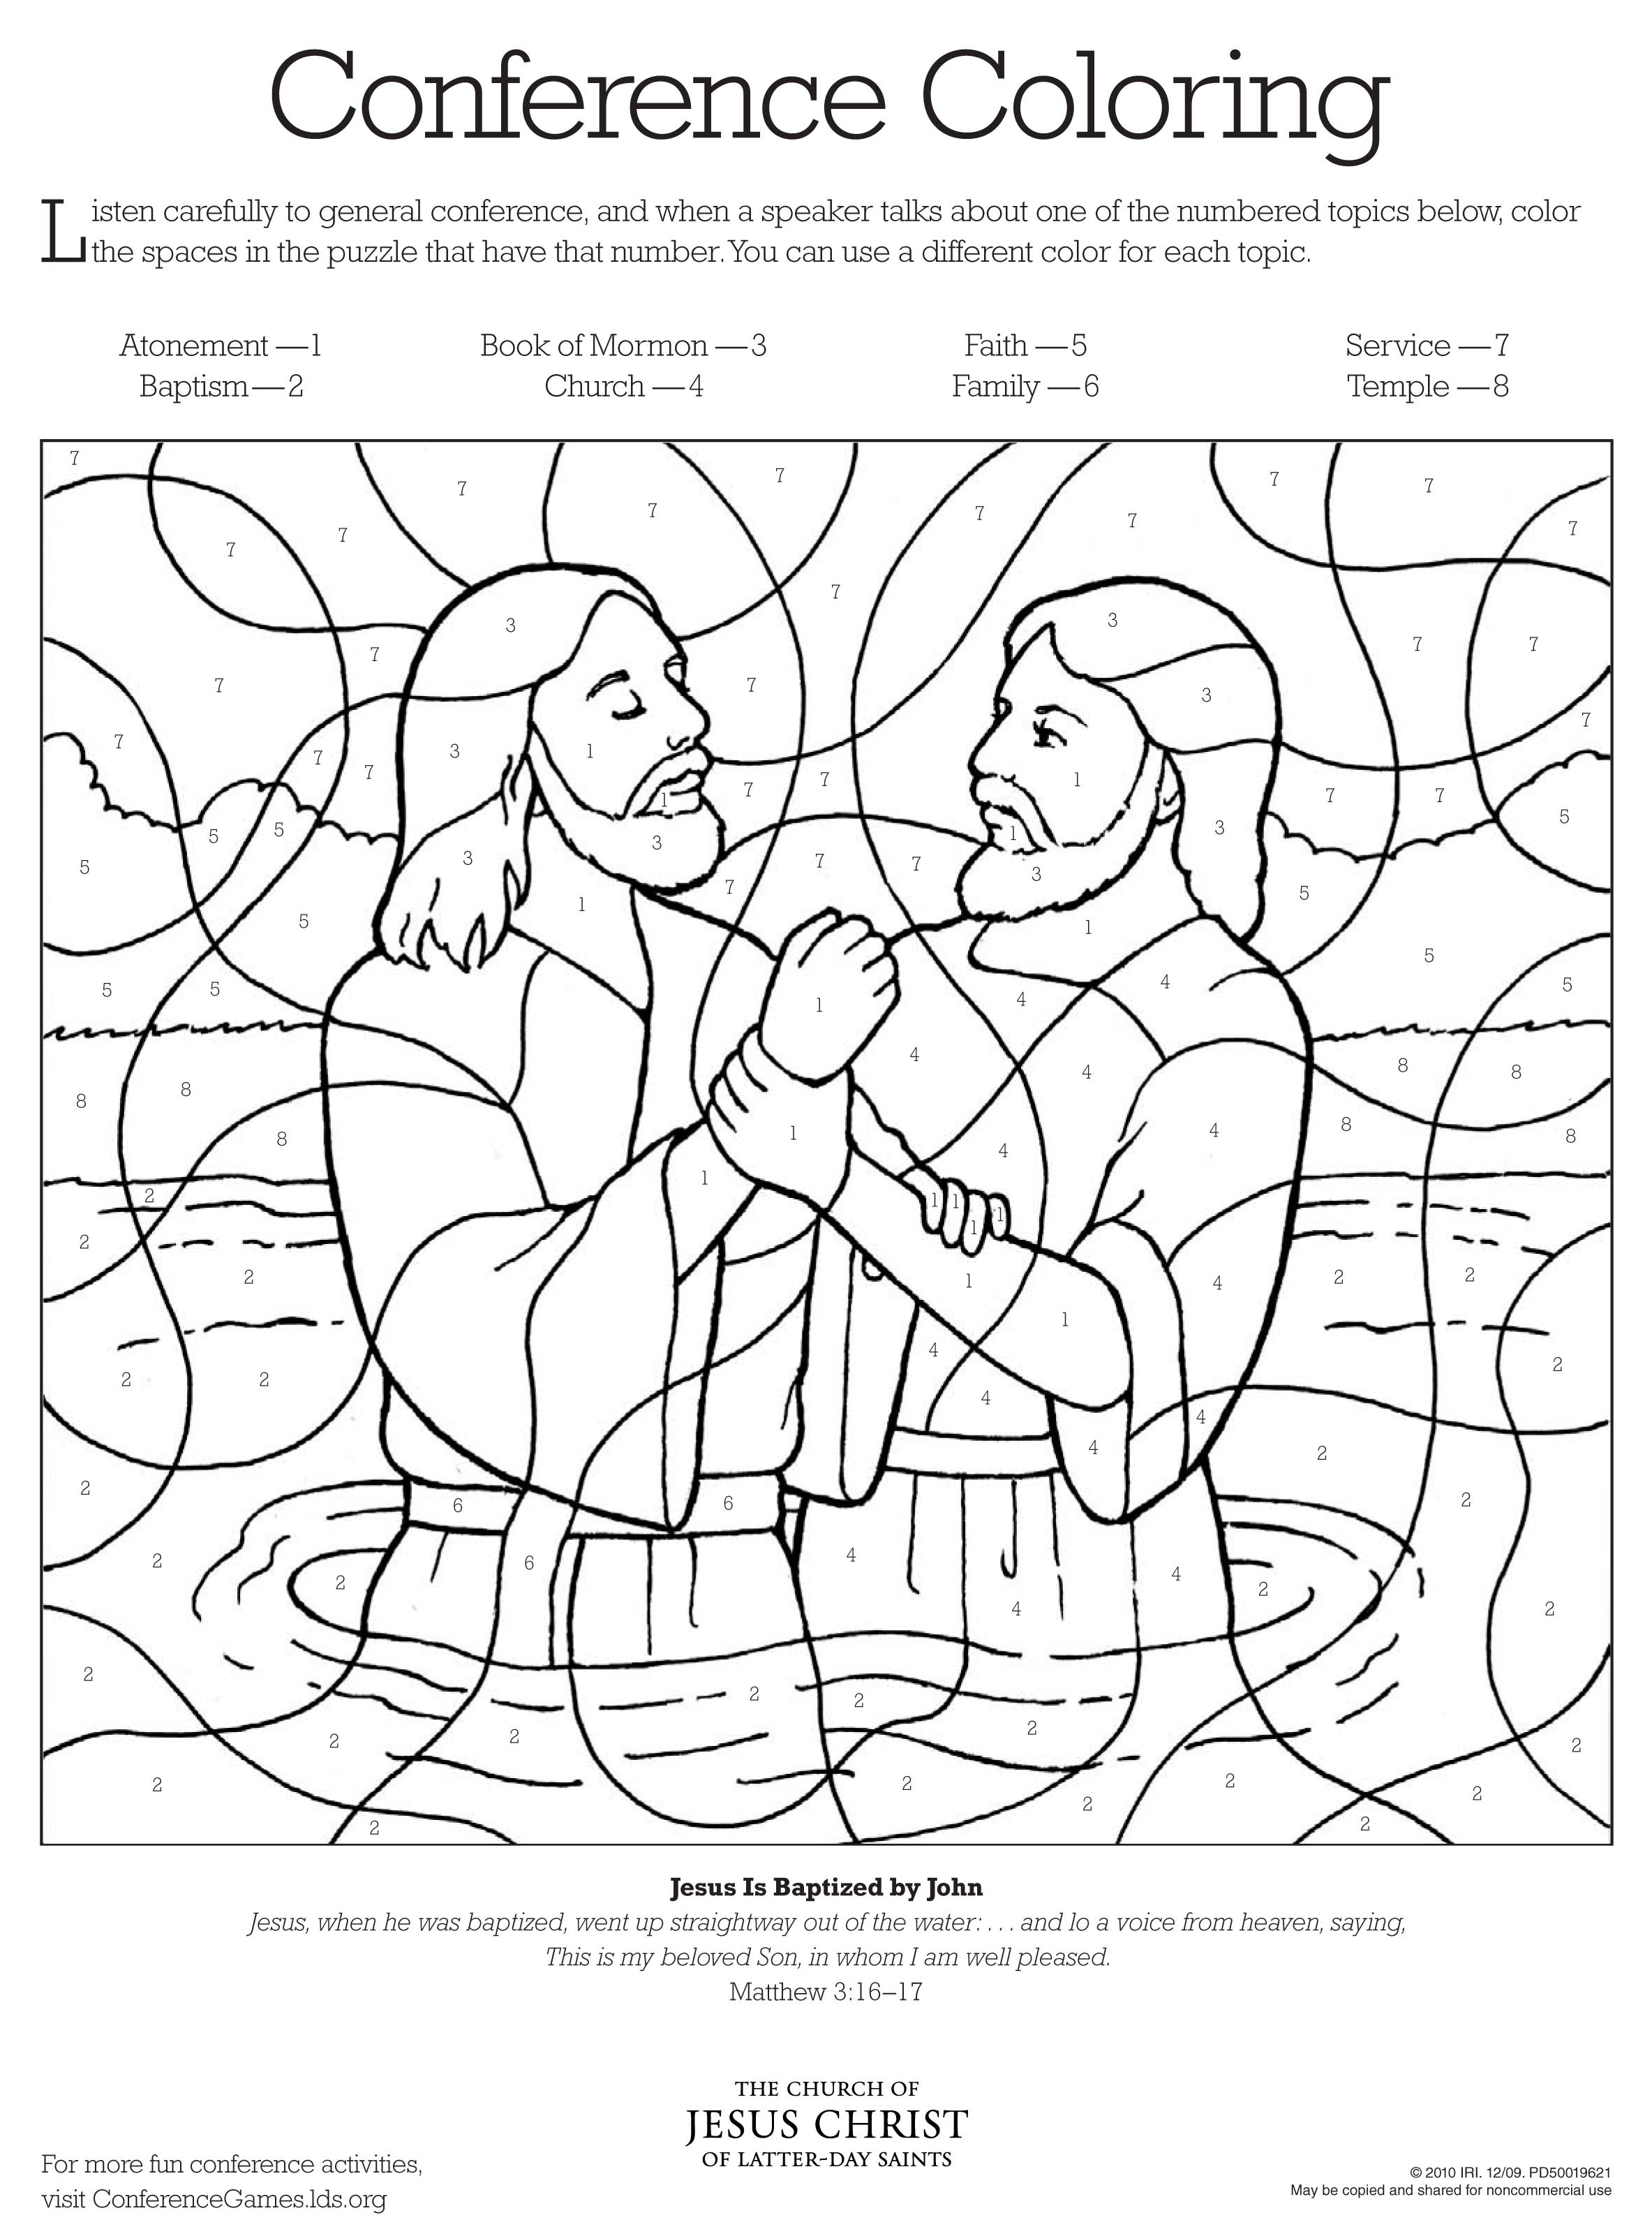 lds-printable-coloring-pages-what-are-the-articles-of-faith